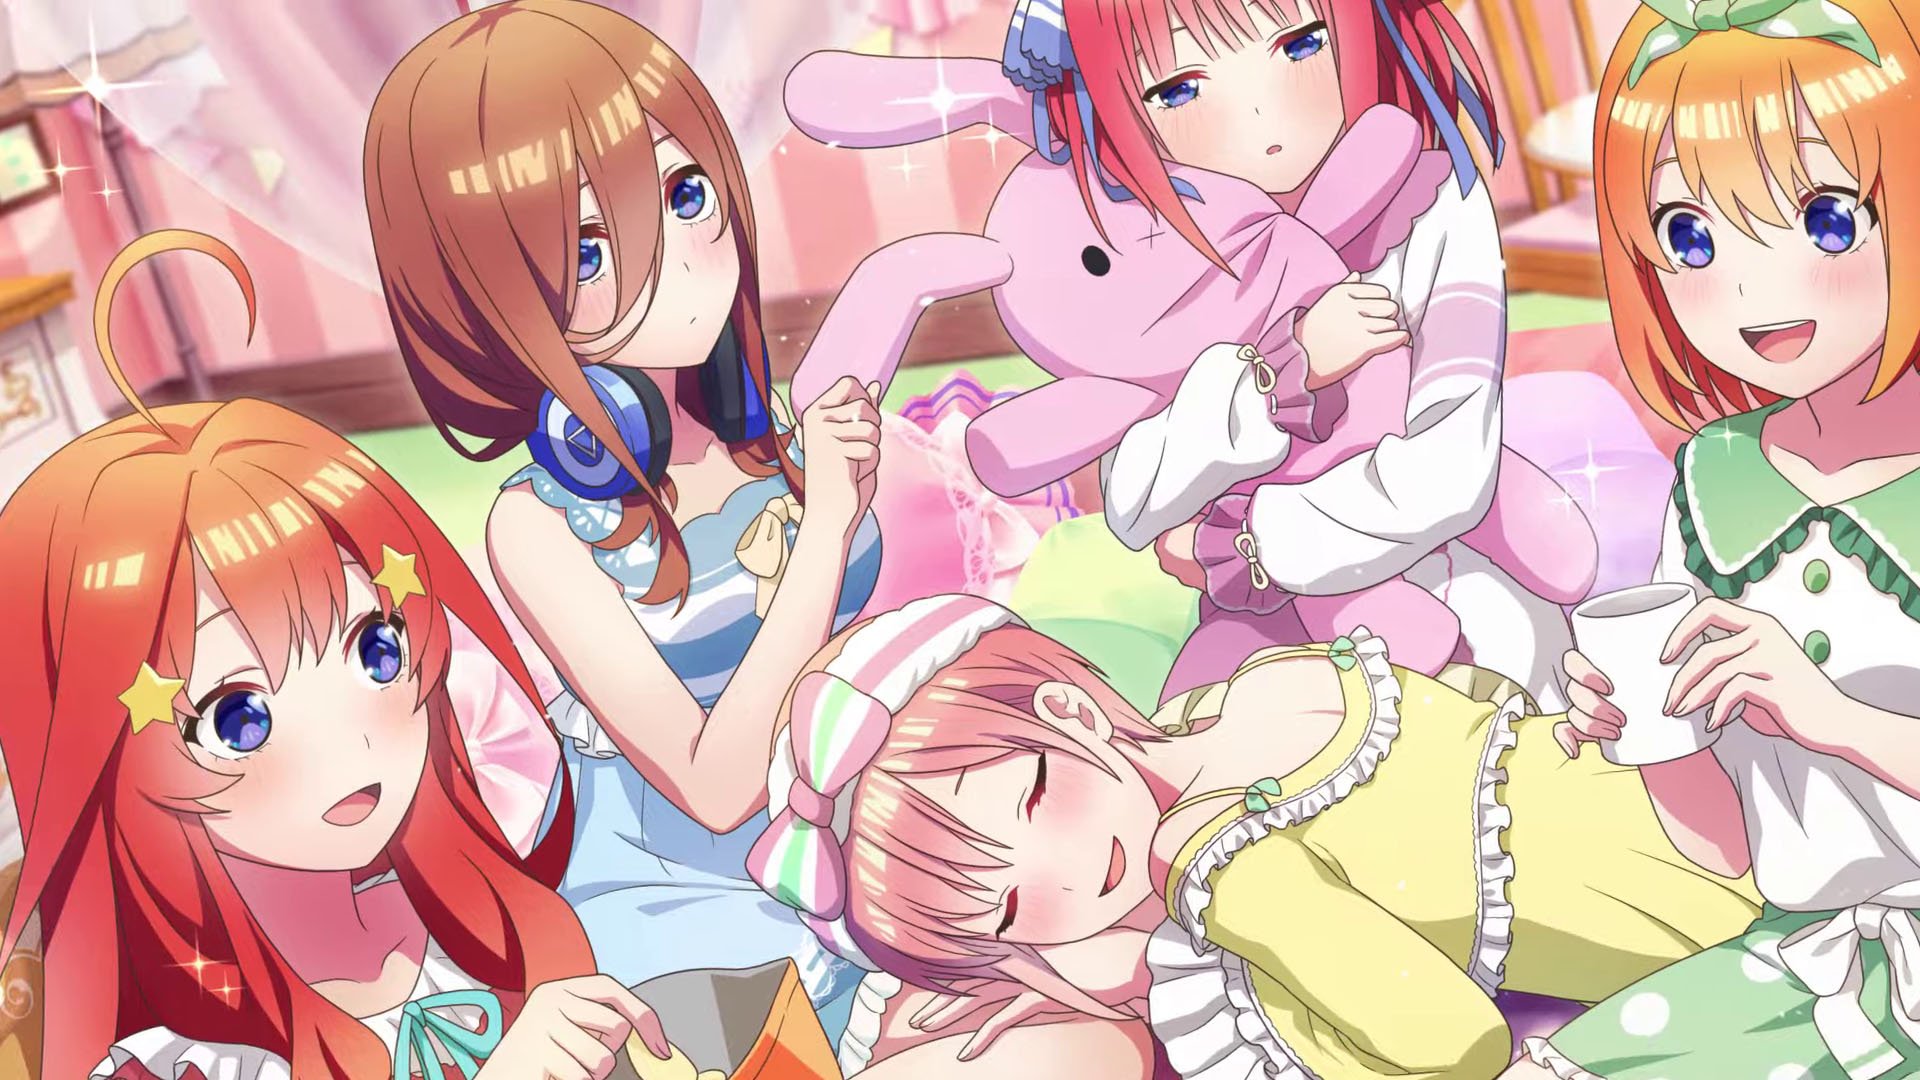 The Quintessential Quintuplets Movie Releases Main Trailer